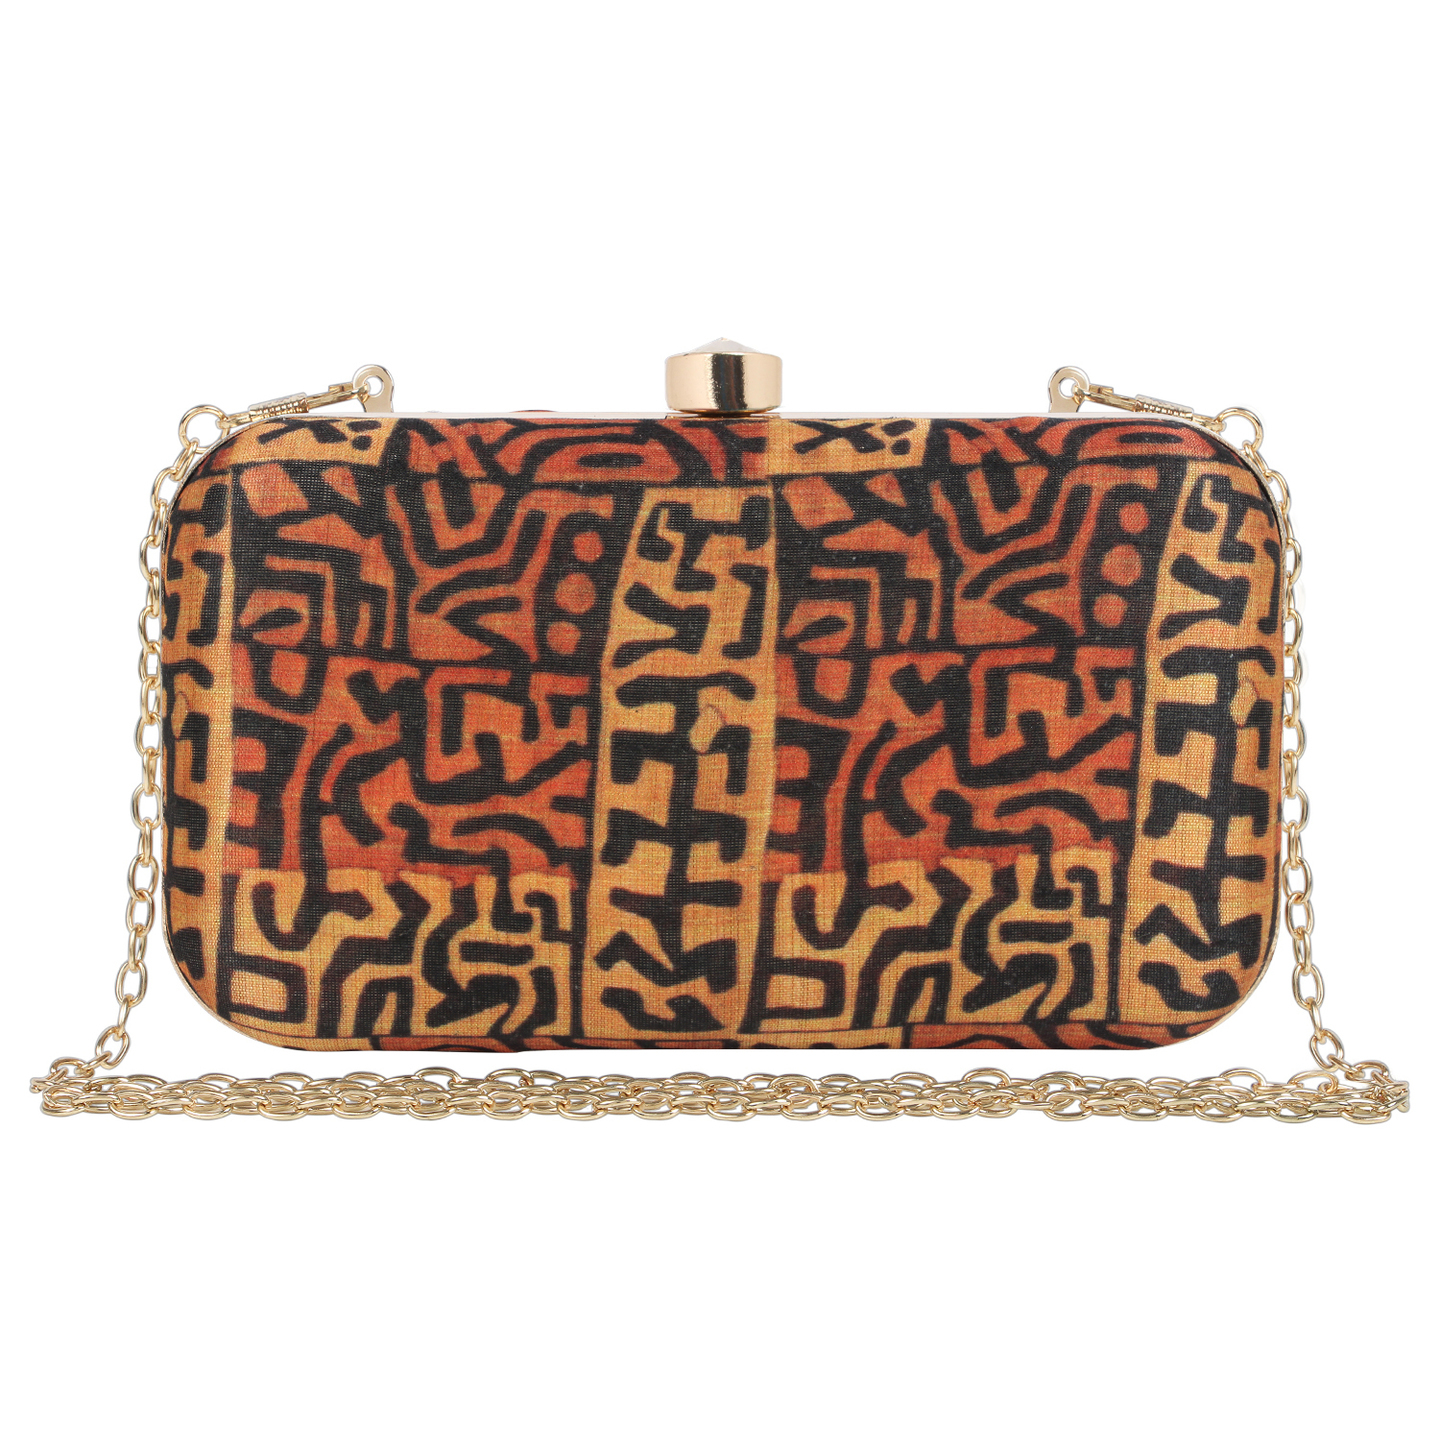 Egyptian Printed Clutch